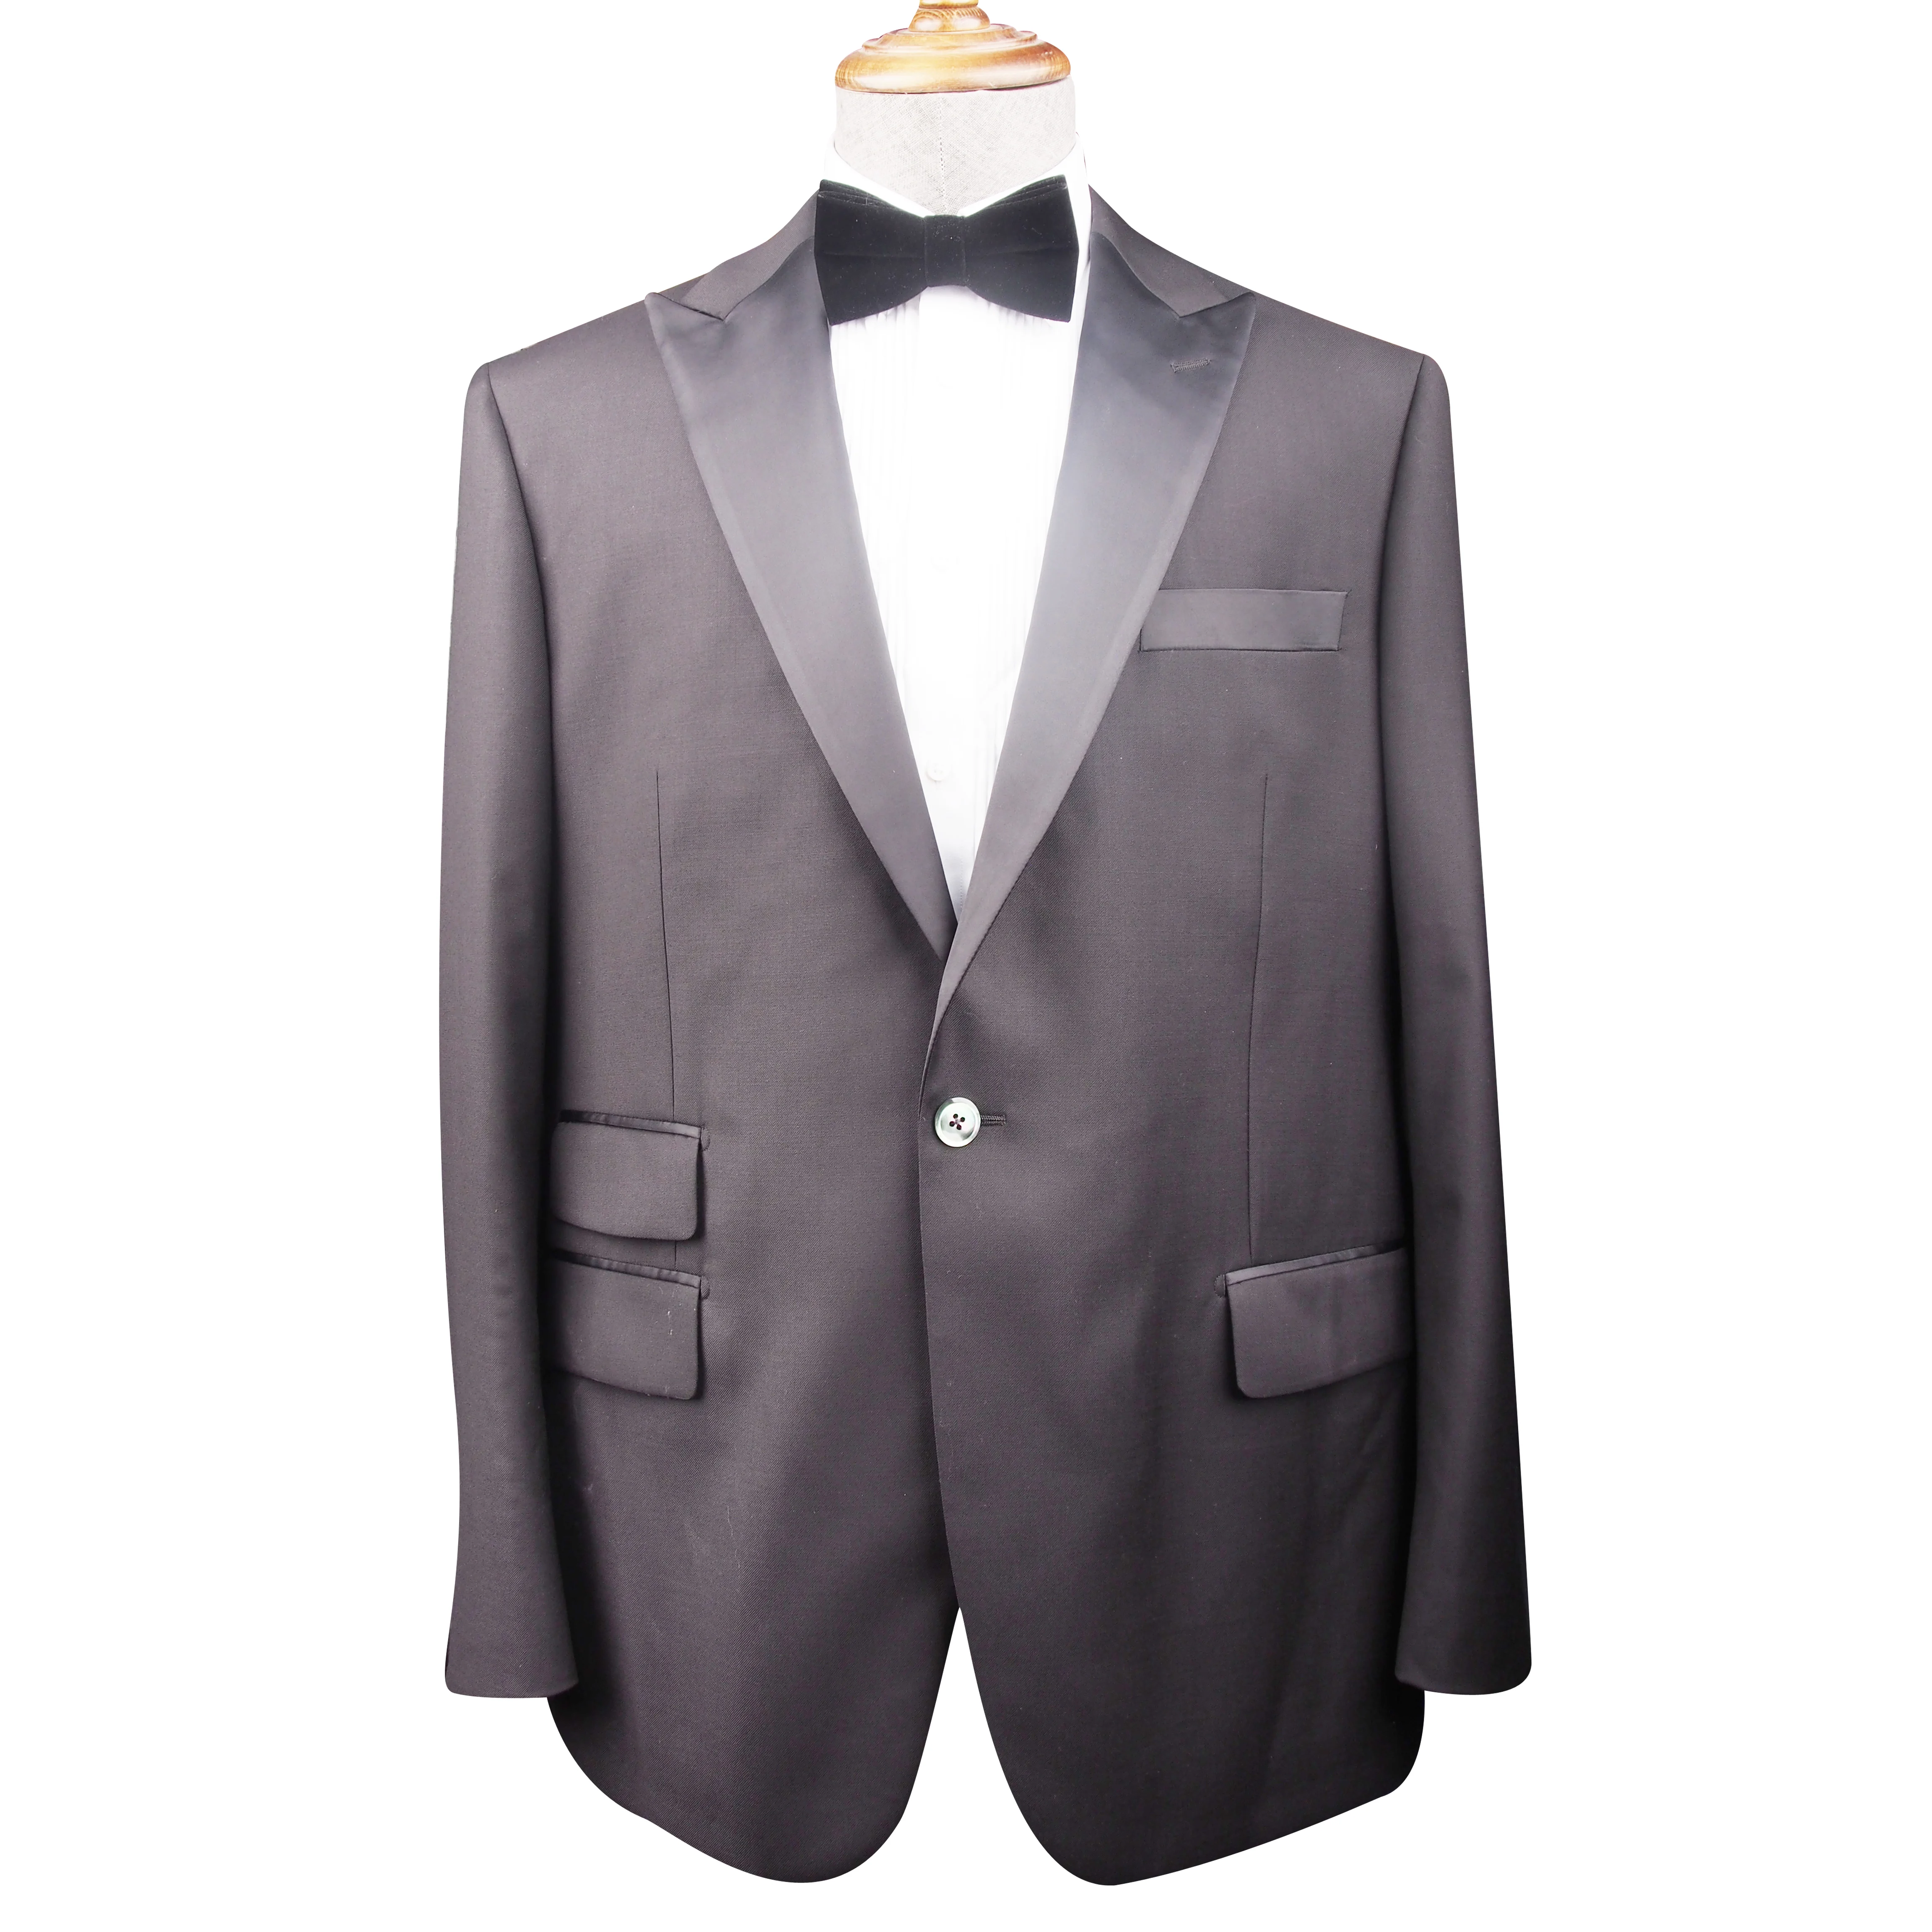 made in China wholesale 2 قِطَع 100% Wool  Tuxedo Suit modern men's suit